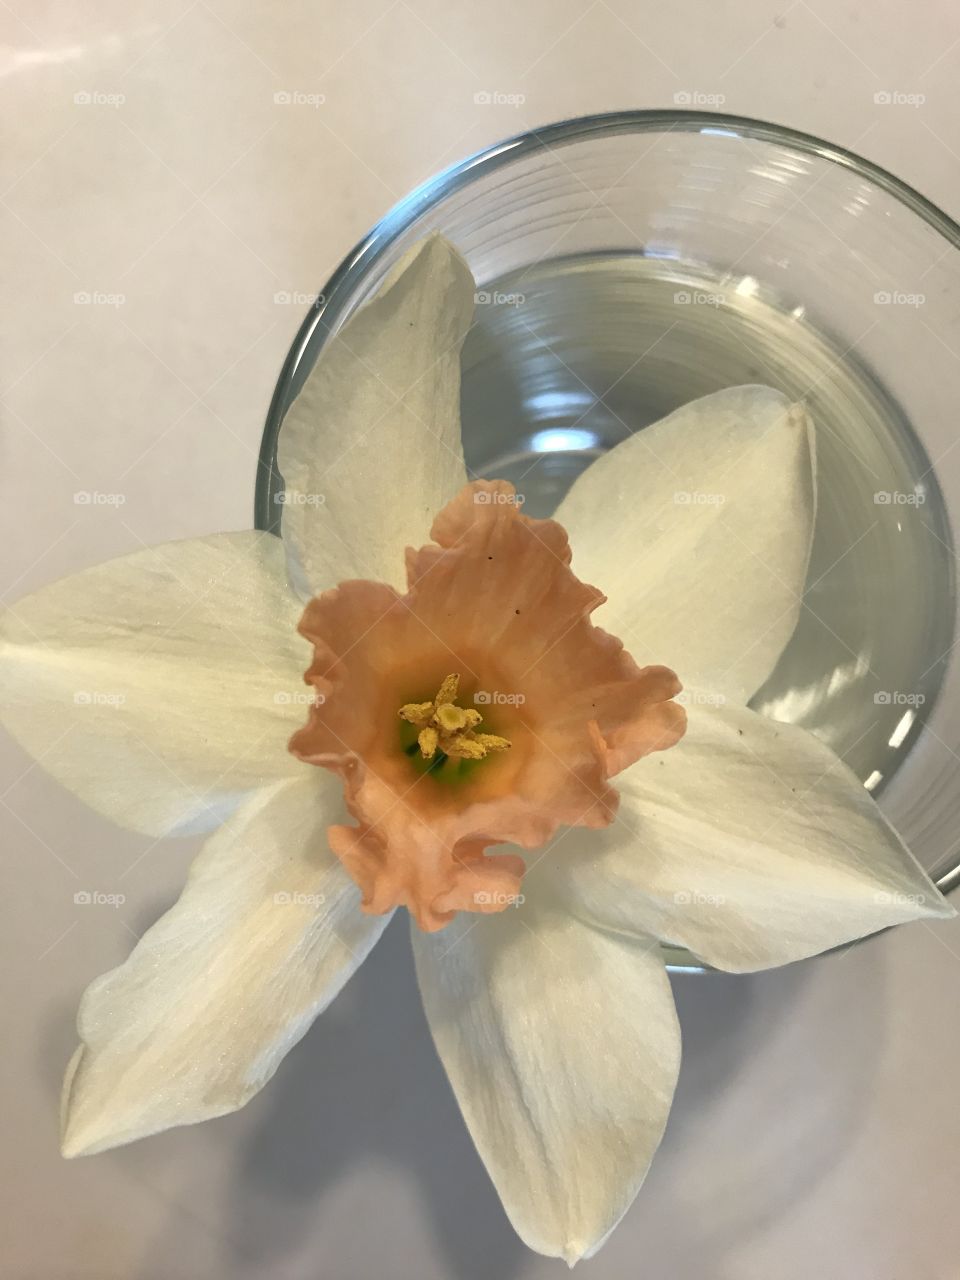 As spring bloomed in our yard, my son would come in from walking the dog with an occasional gift of flowers from our yard. This daffodil was one of the first. It may seem like a simple little flower in a glass but means the world to me!